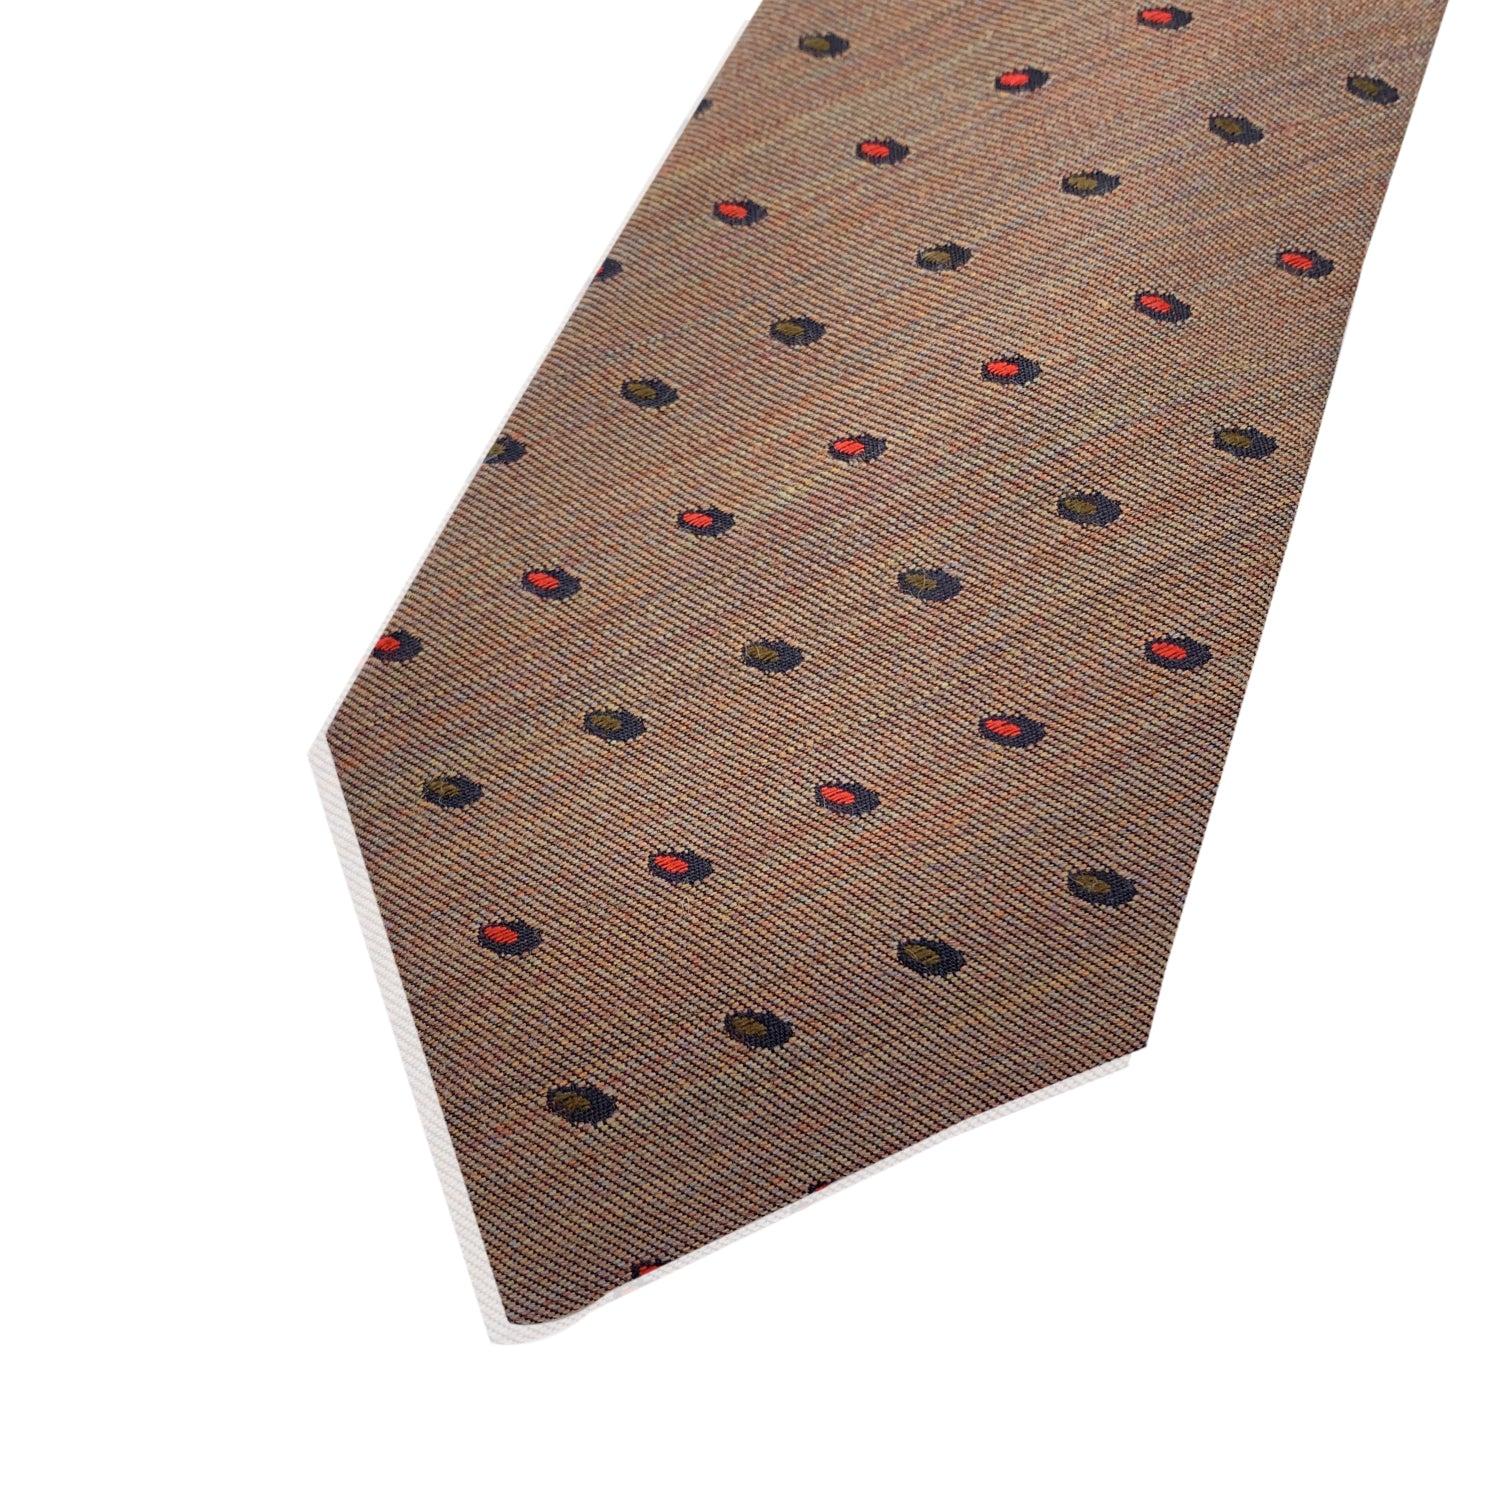 Elegant Hermes Neck Tie in brown color. Composition: 60% Silk, 40% Wool. Hermes composition tag attached. Made in France. Total length: 55 inches - 139.5 cm. Max width: 3.5 inches - 8.9 cm

Details

MATERIAL: Wool

COLOR: Brown

MODEL: -

GENDER: